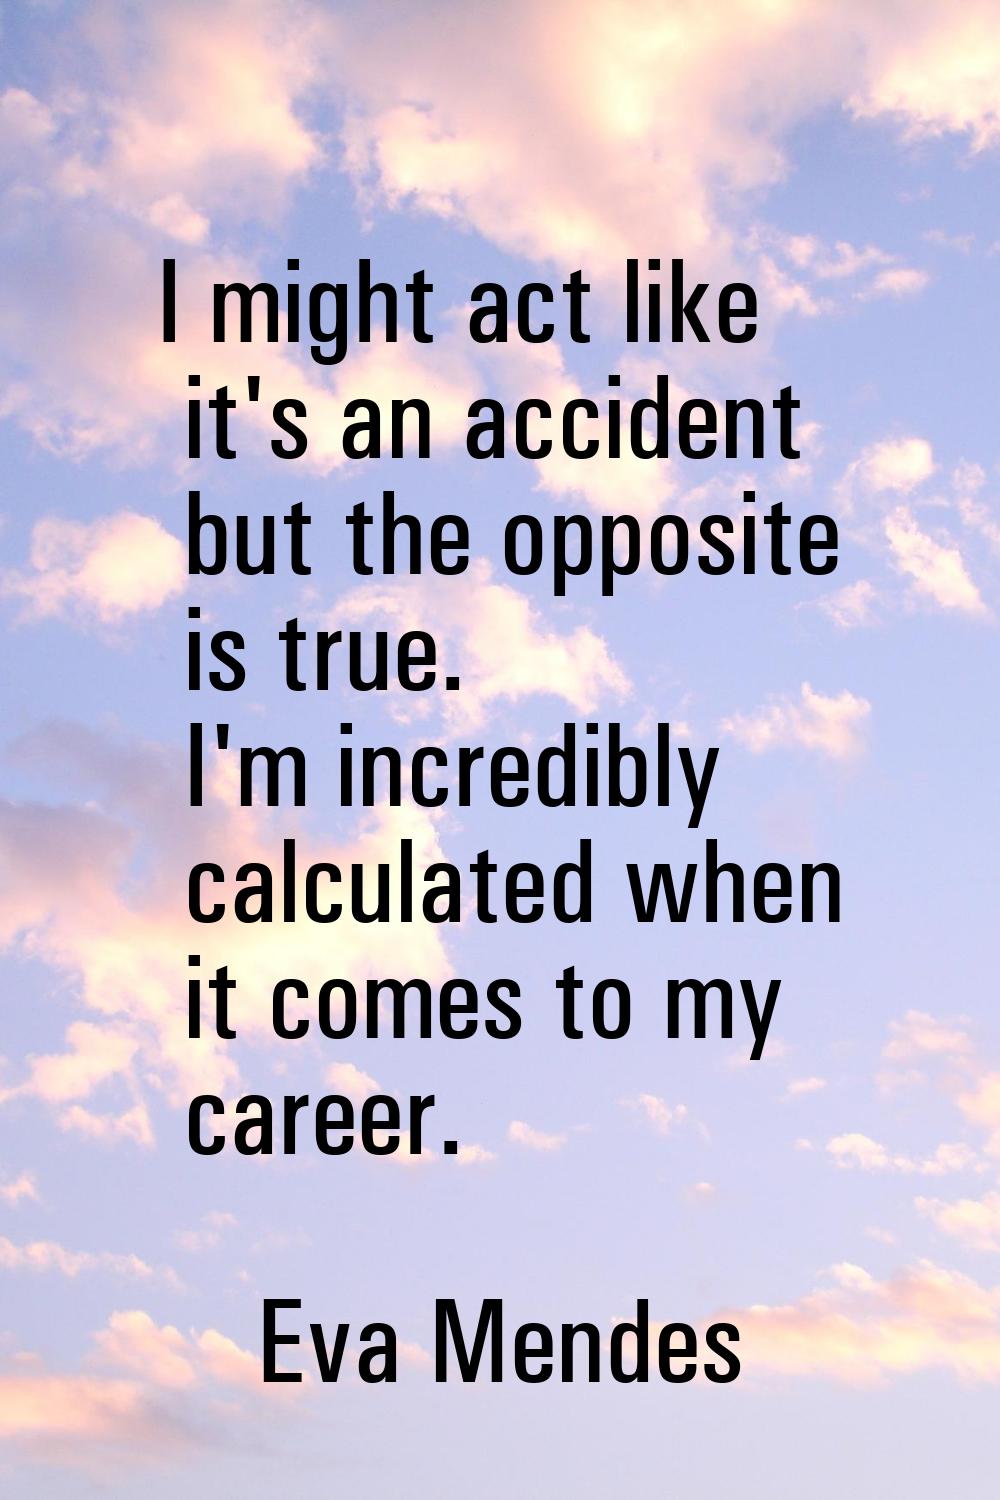 I might act like it's an accident but the opposite is true. I'm incredibly calculated when it comes